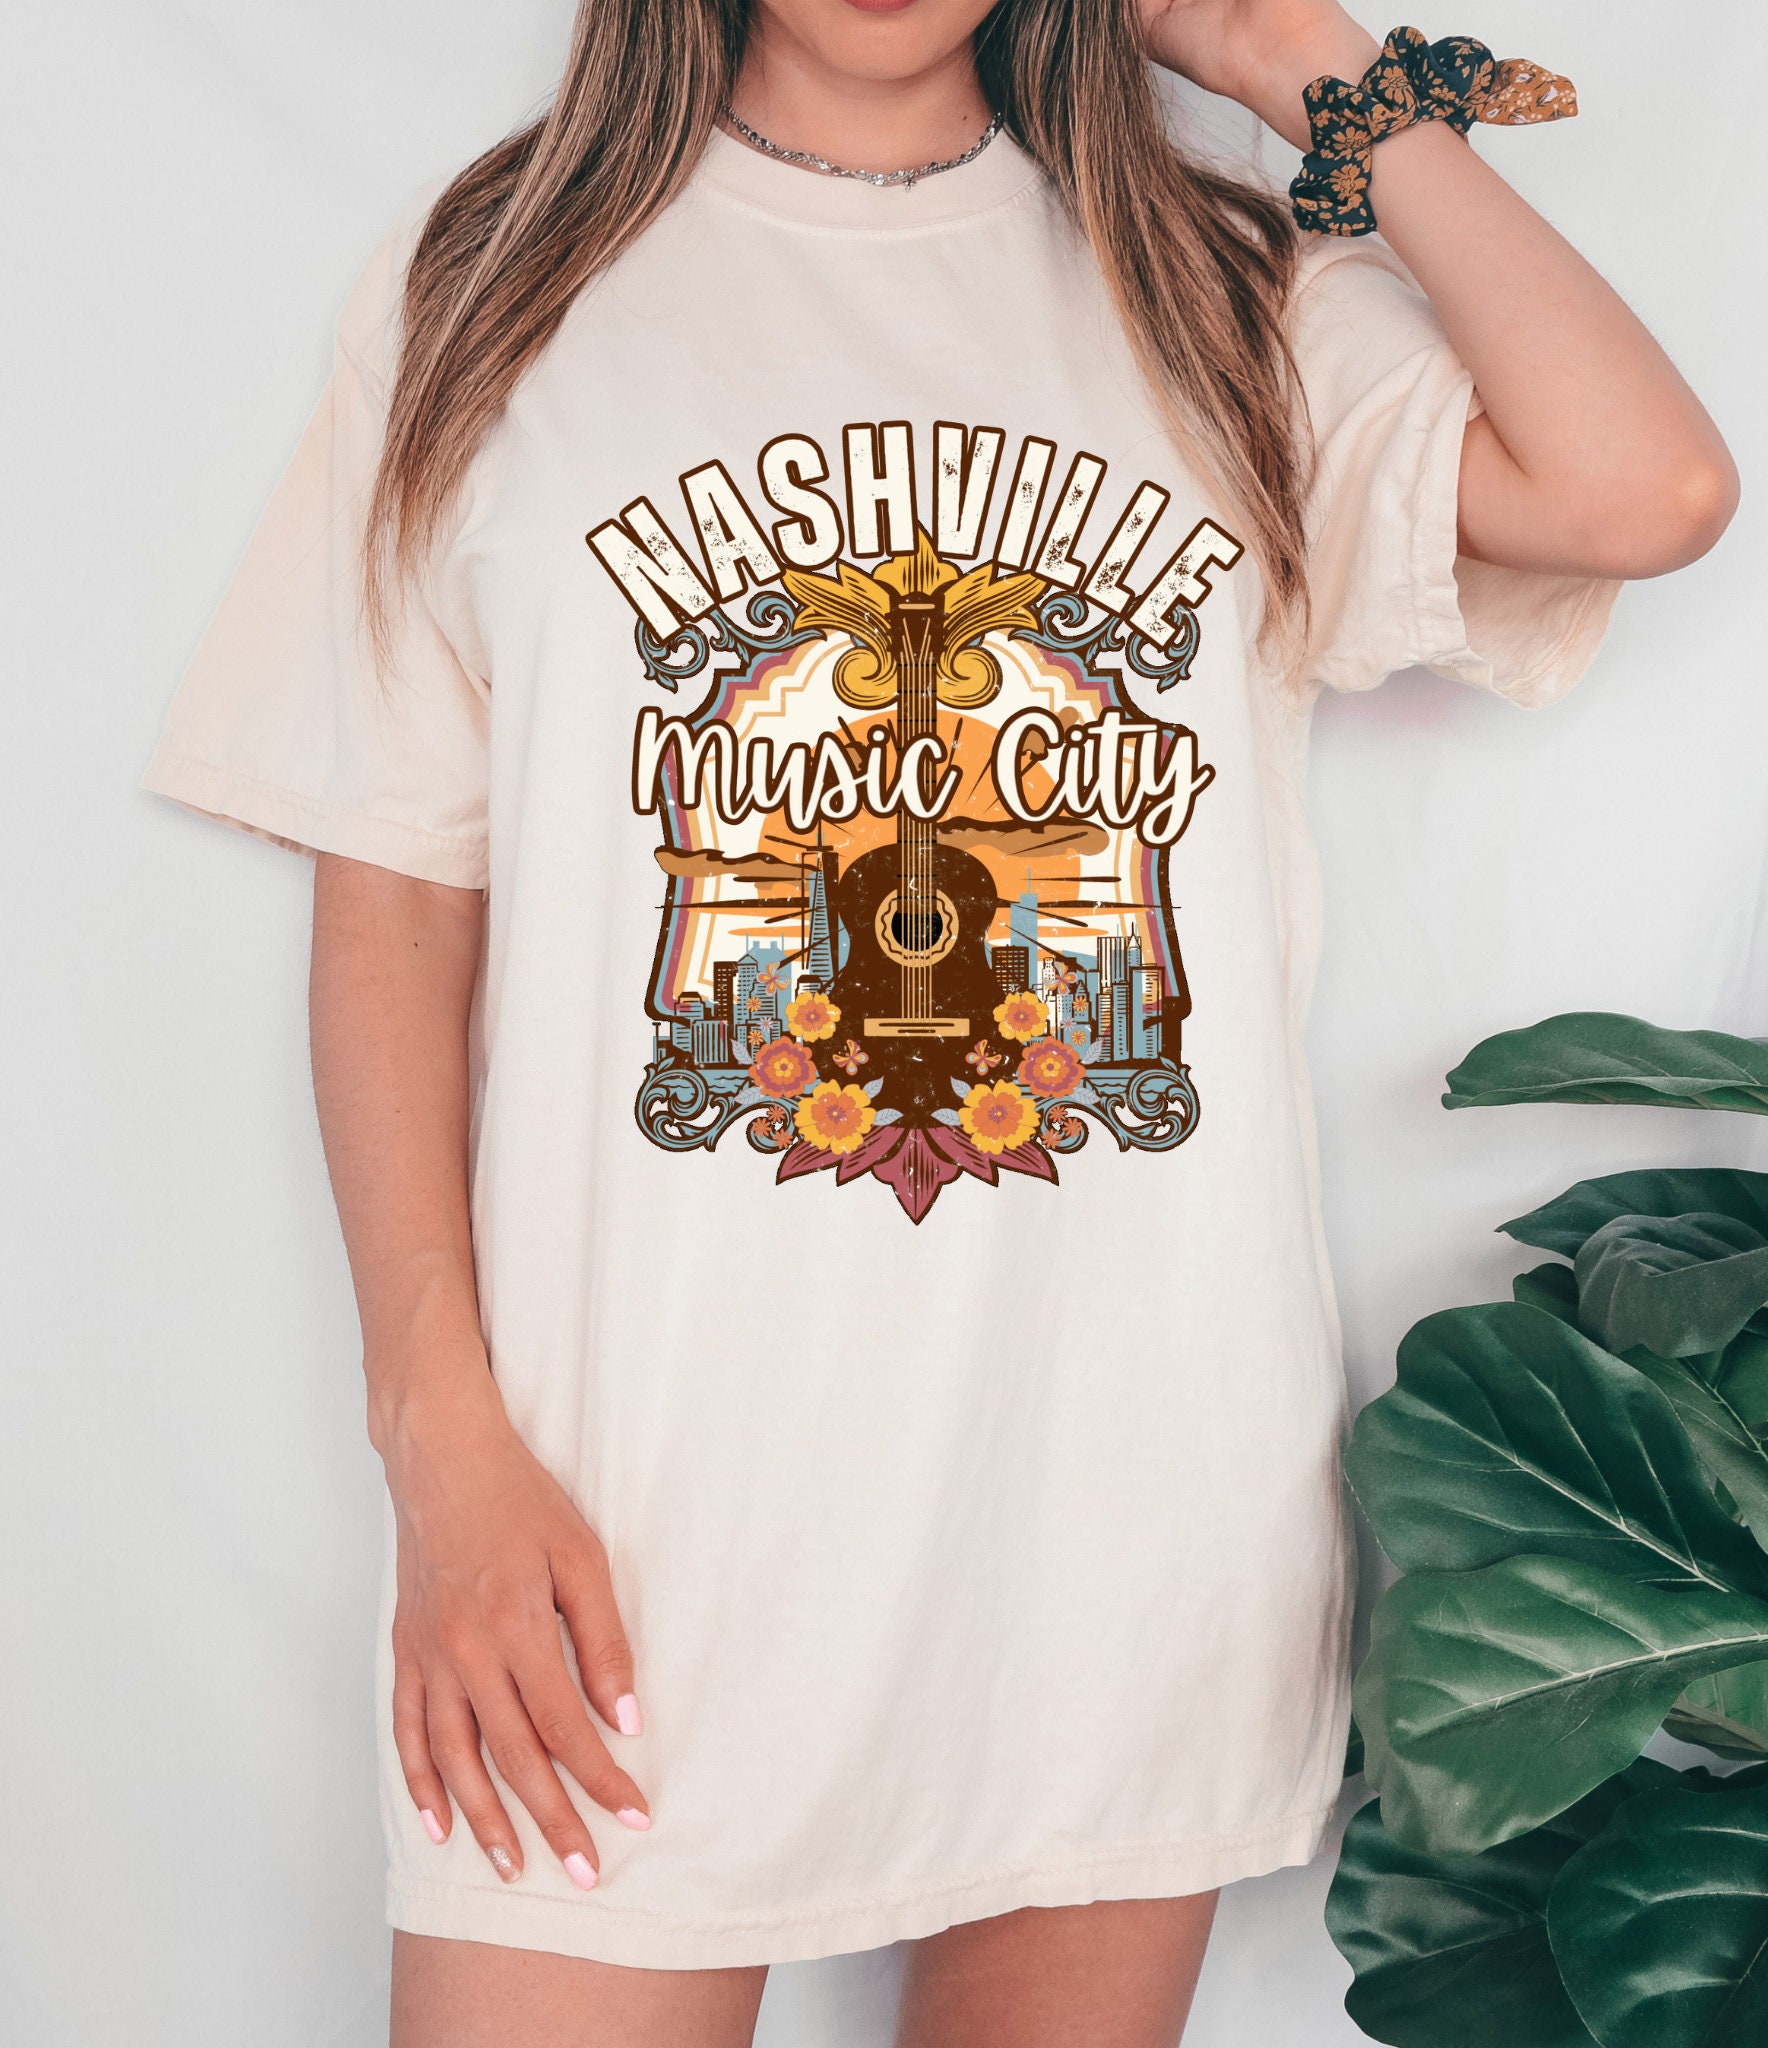 Discover Nashville Tee, Nashville T-shirt, Music City, Tennessee Tee, Vintage Inspired T-Shirt